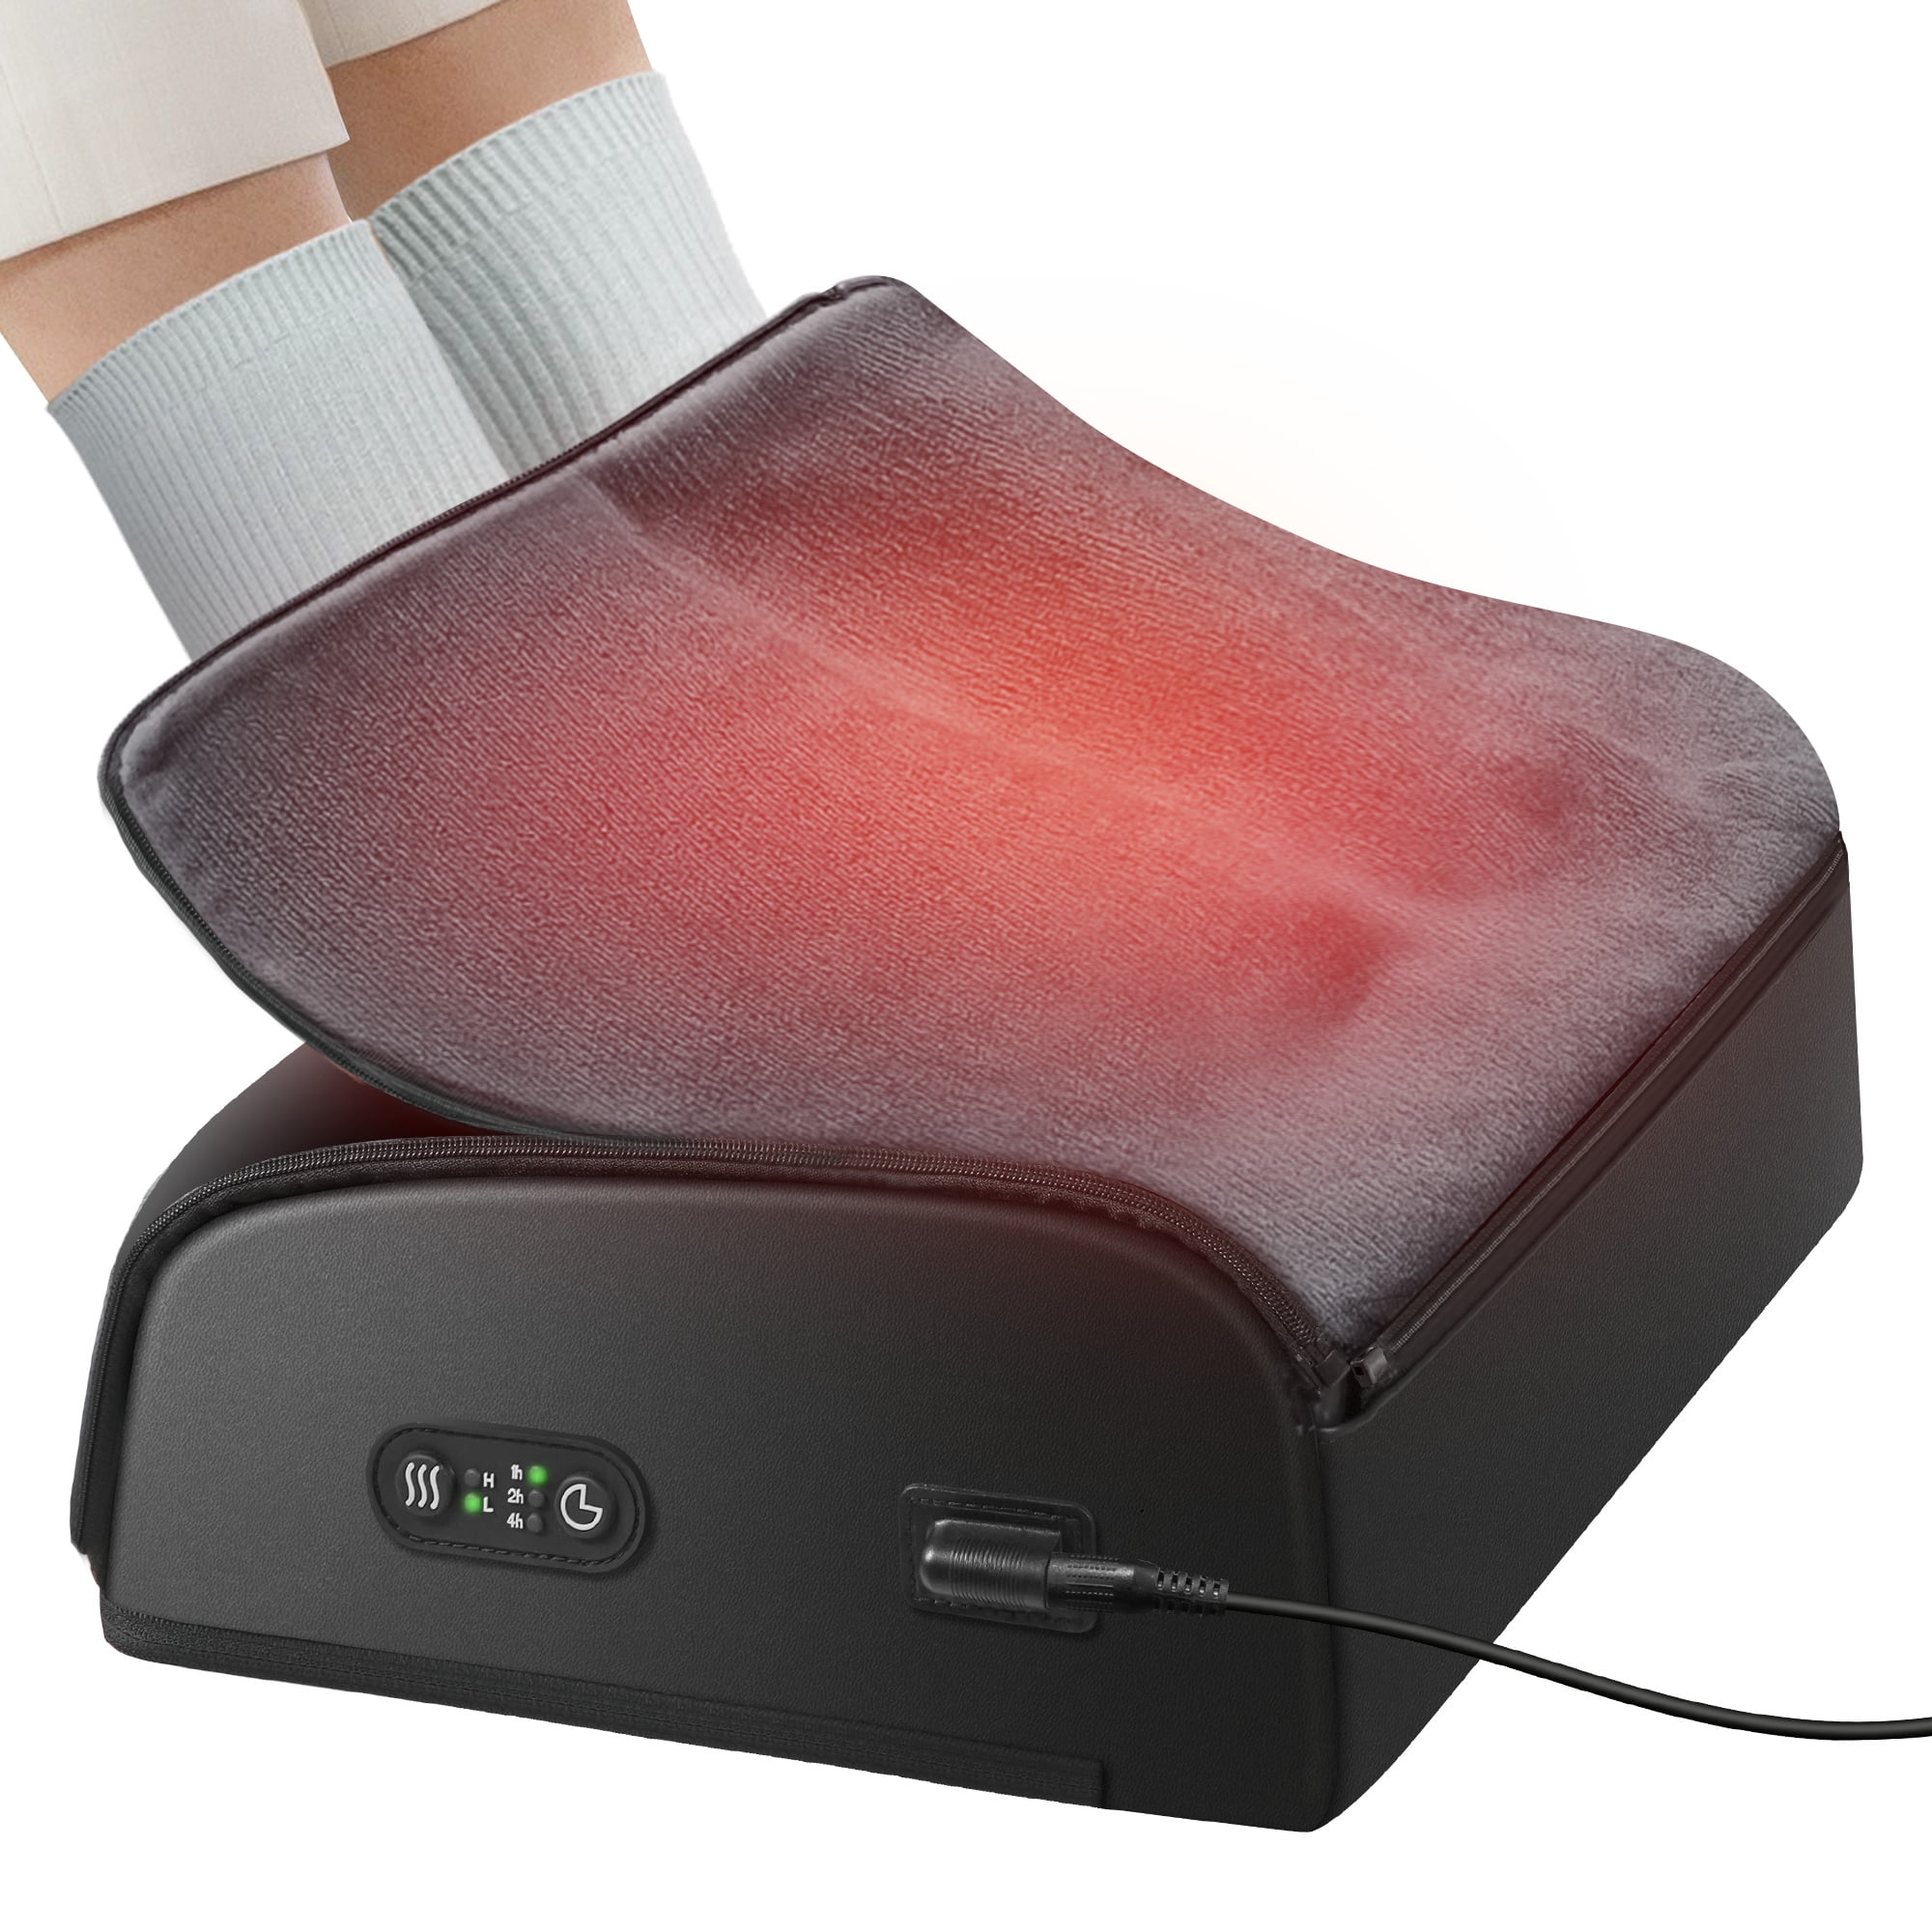 Comfier Heated Foot Rest for Under Desk at Work&Foot Warmer,Adjustable  Ergonomic Foot Stand,Office Chair&Home Gaming Desk Footstool,Memory Foam